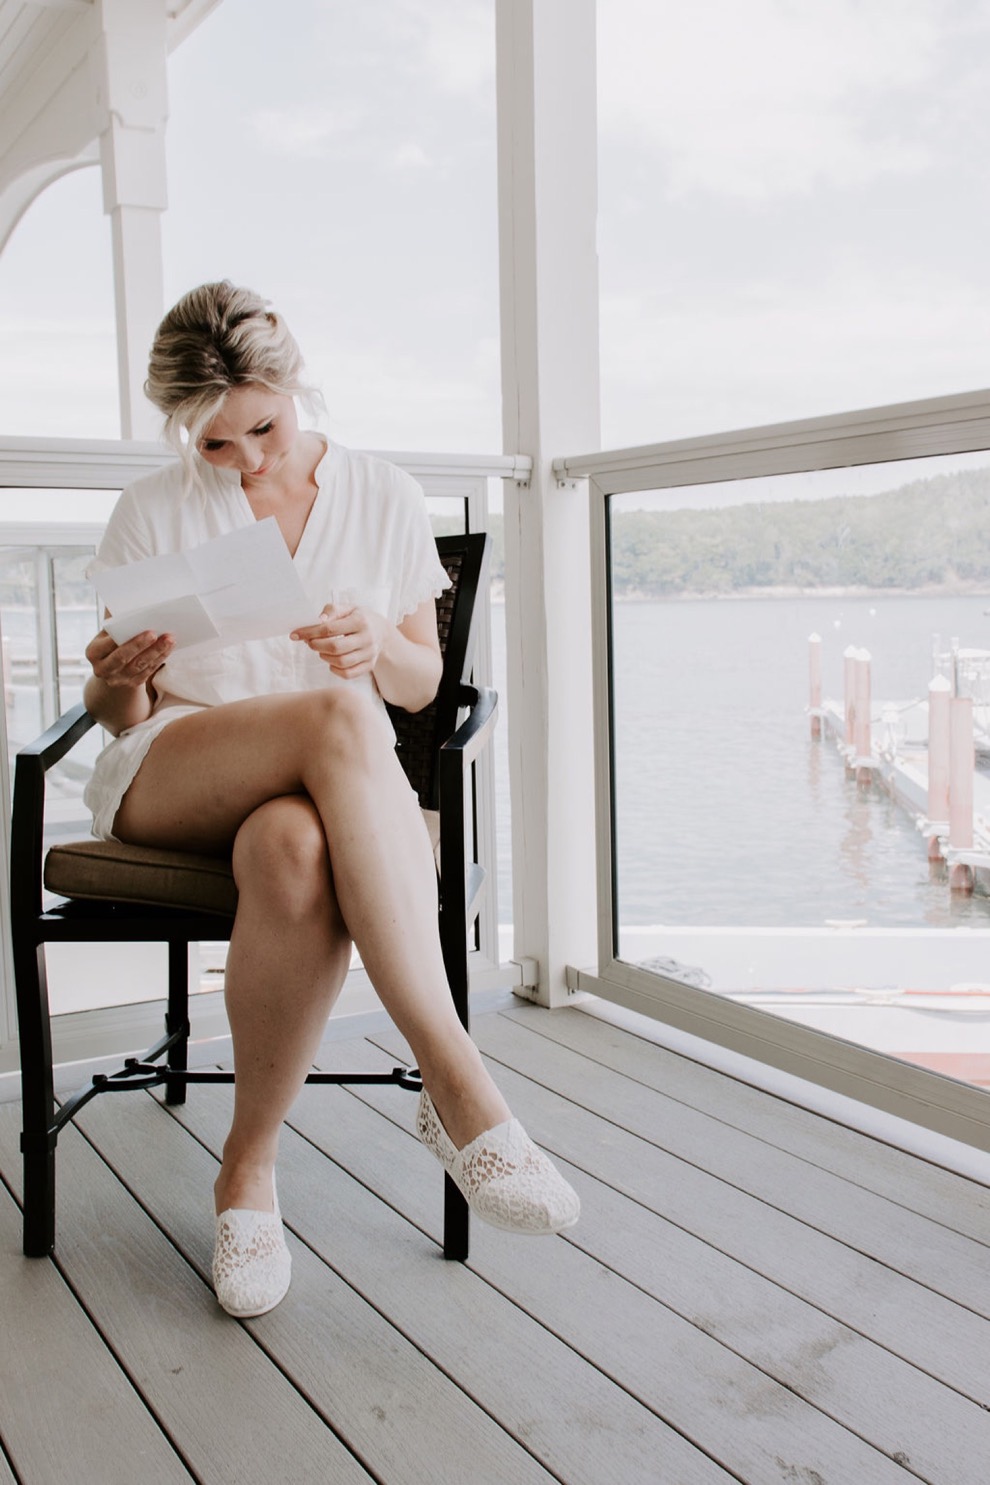 bride reading letter on balcony overlooking water